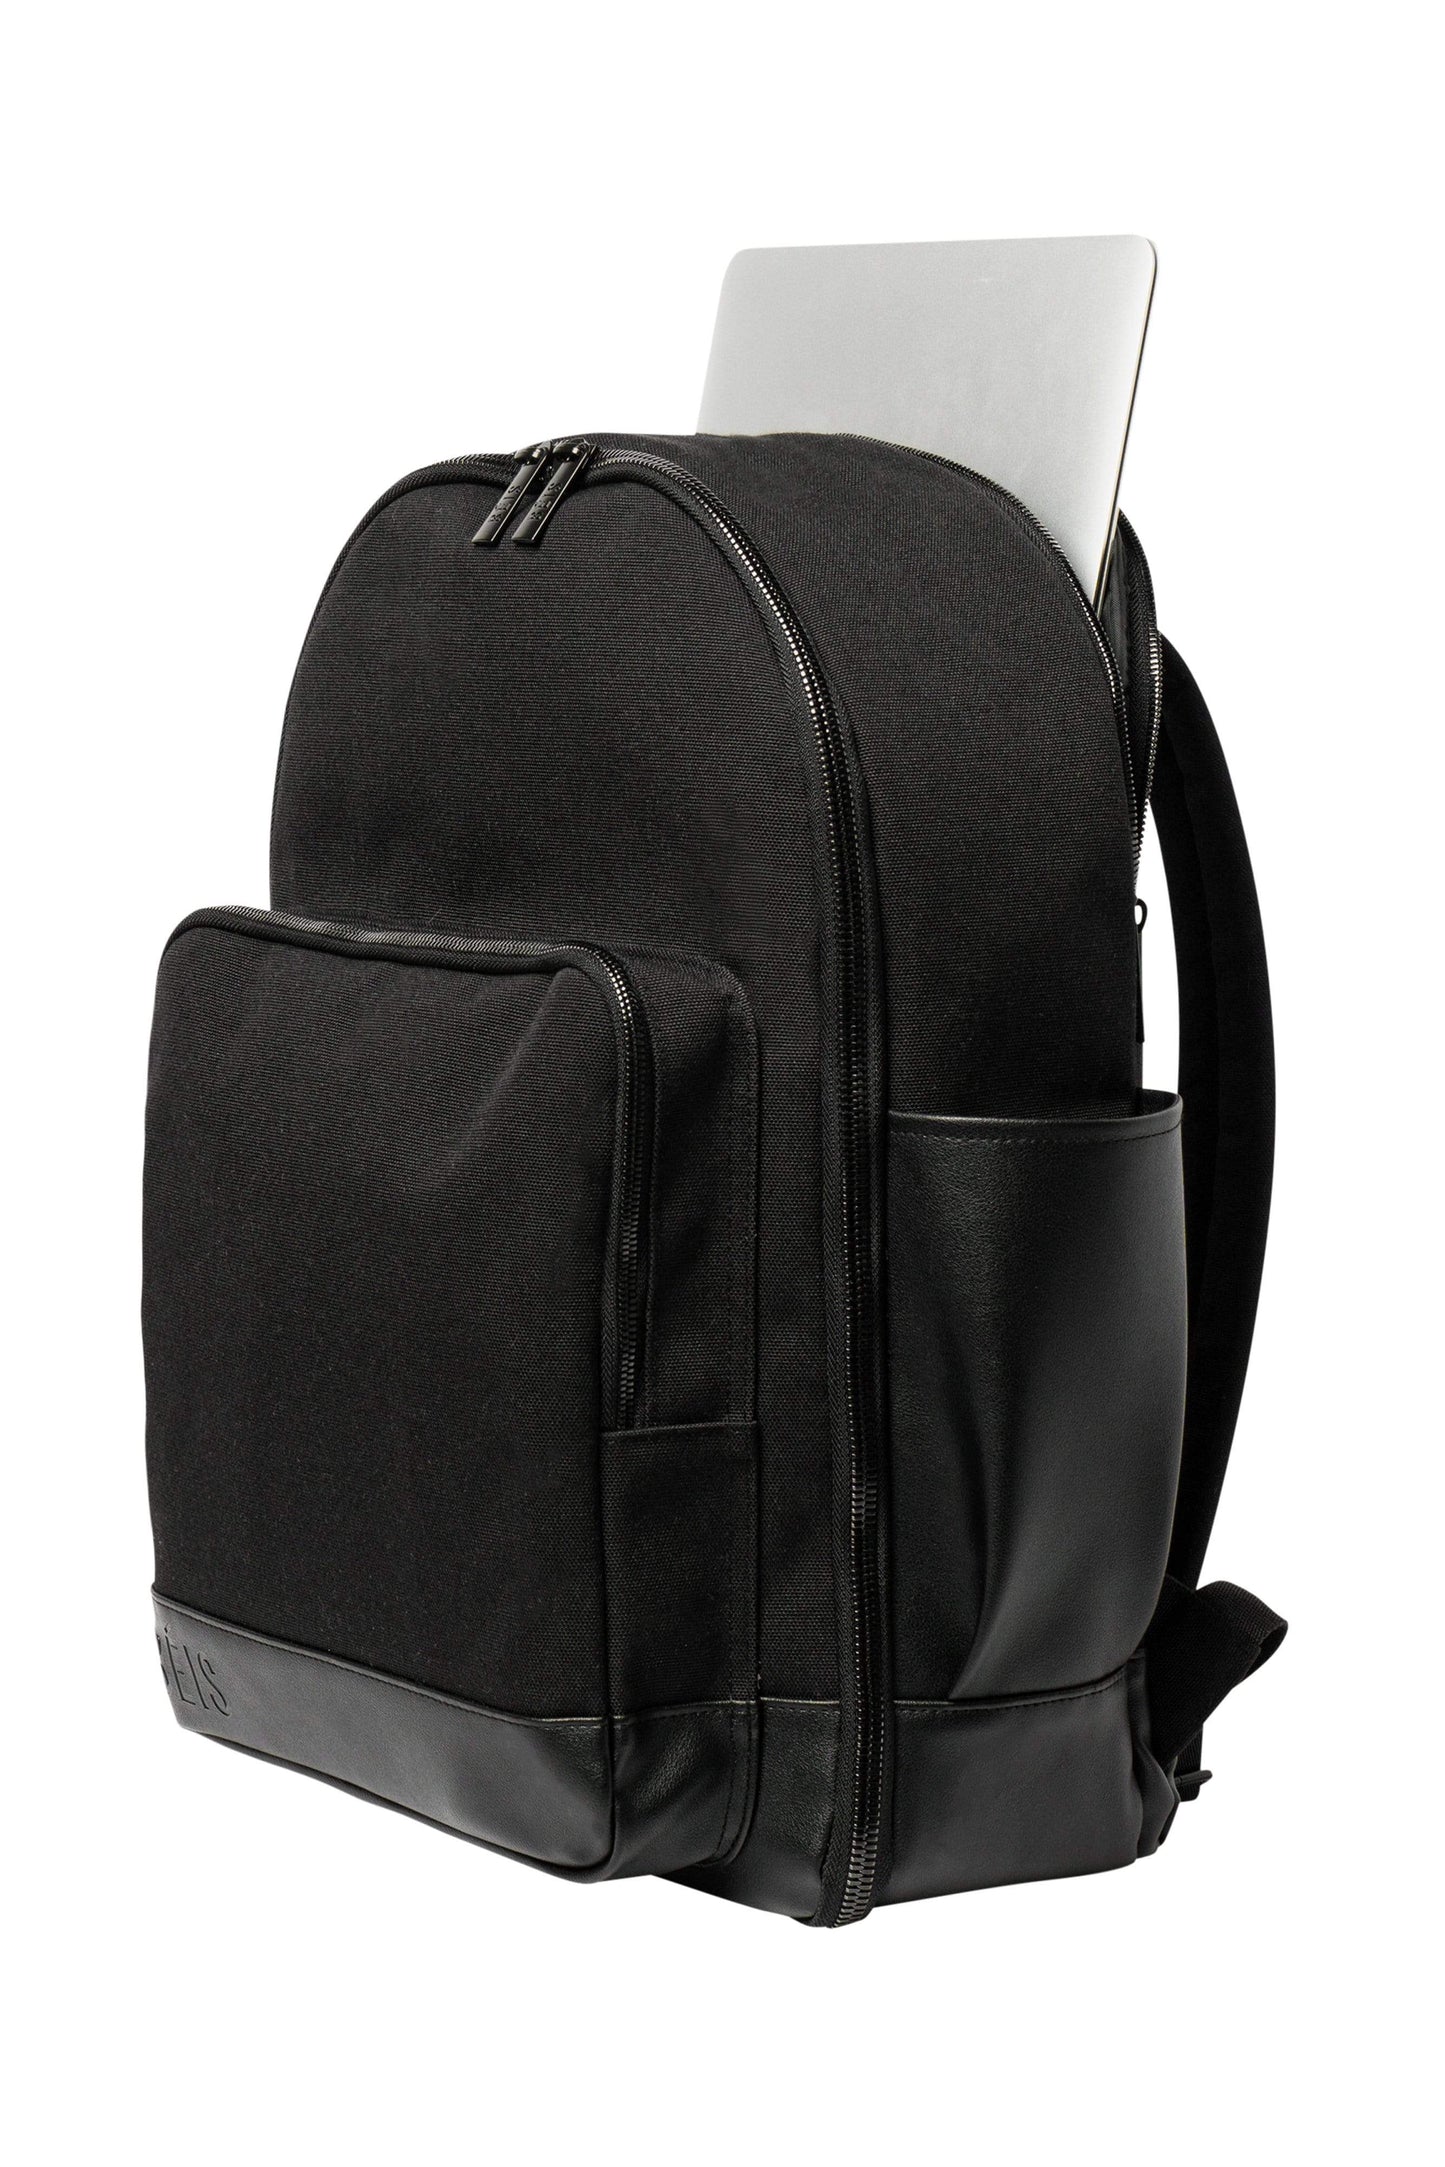 BEIS by Shay Mitchell | The Backpack in Black (Product Image - with Laptop)